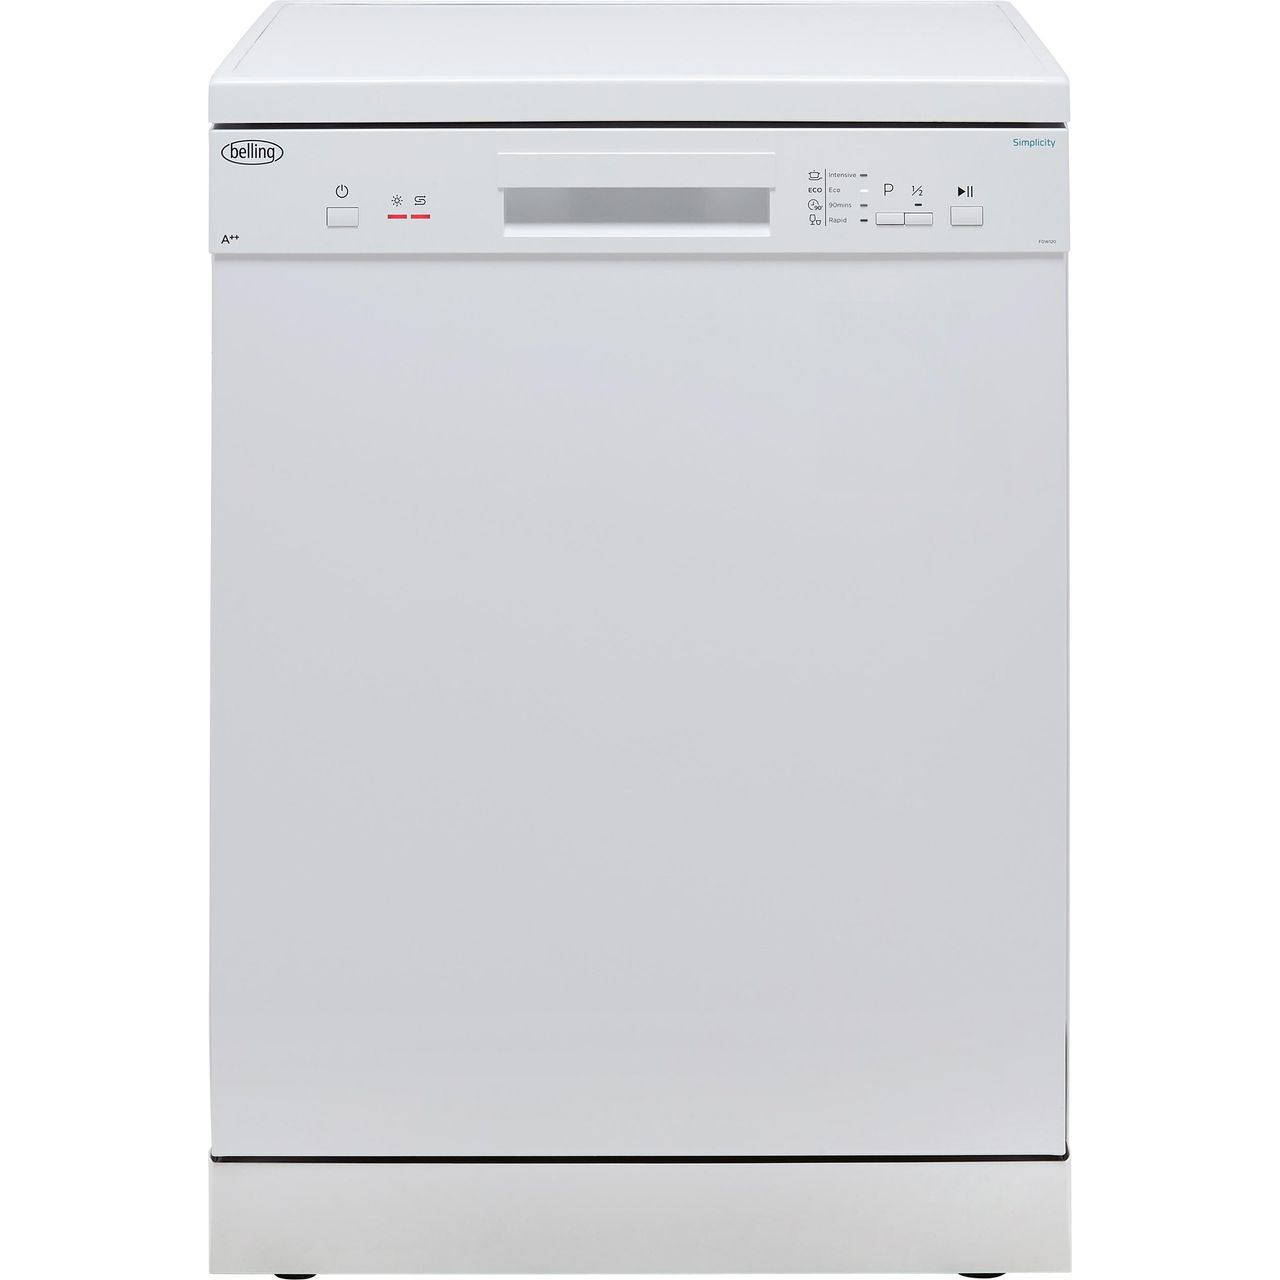 Belling Simplicity FDW120 Standard Dishwasher Review